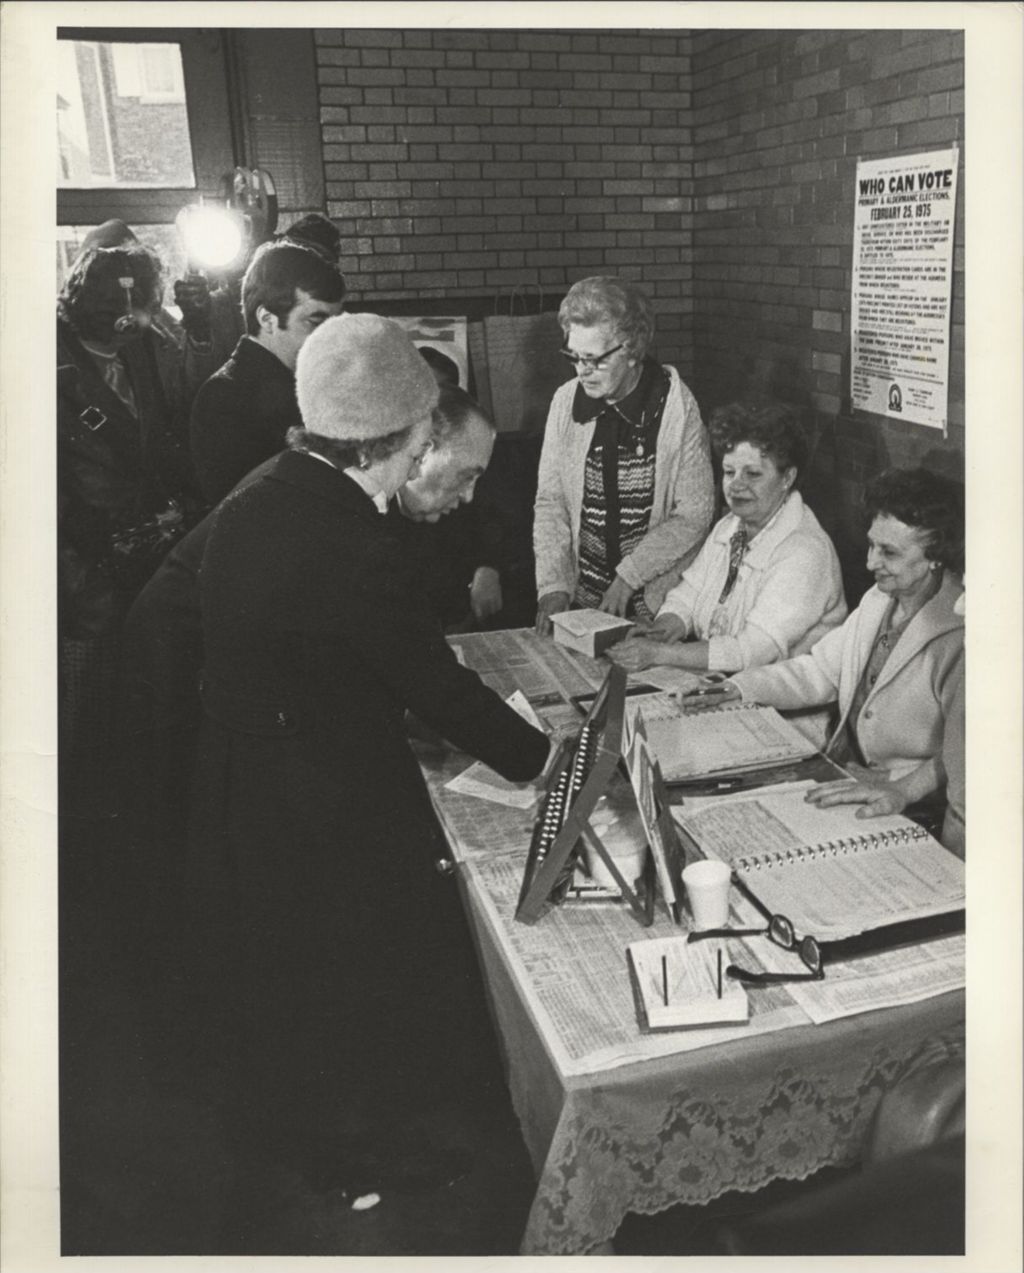 Miniature of Eleanor and Richard J. Daley at the voter registration table on voting day